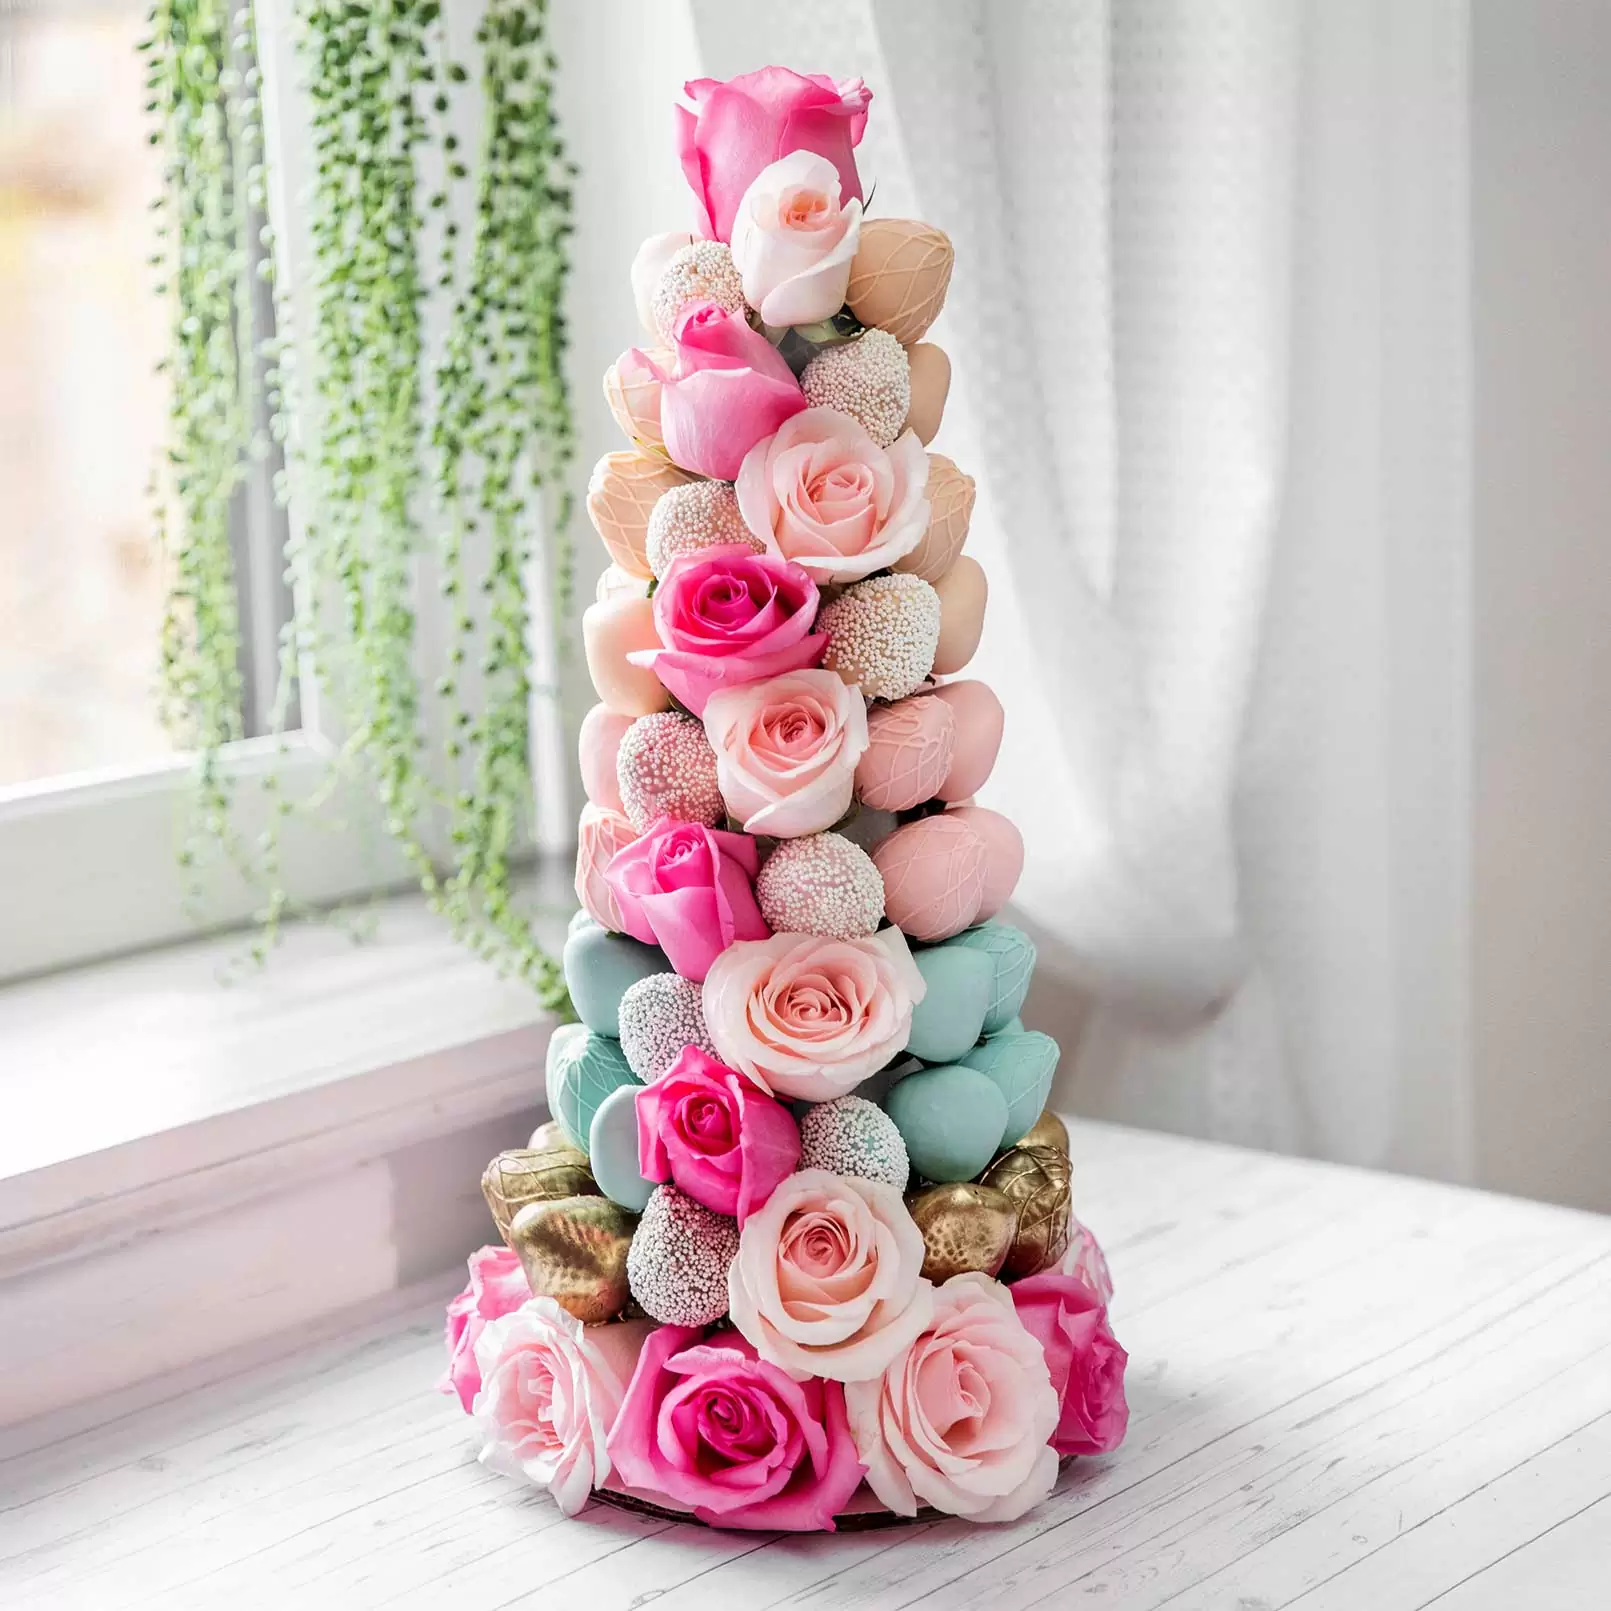 Indulge In Sweetness With Decadent Chocolate-Covered Strawberry Towers For Your Next Event